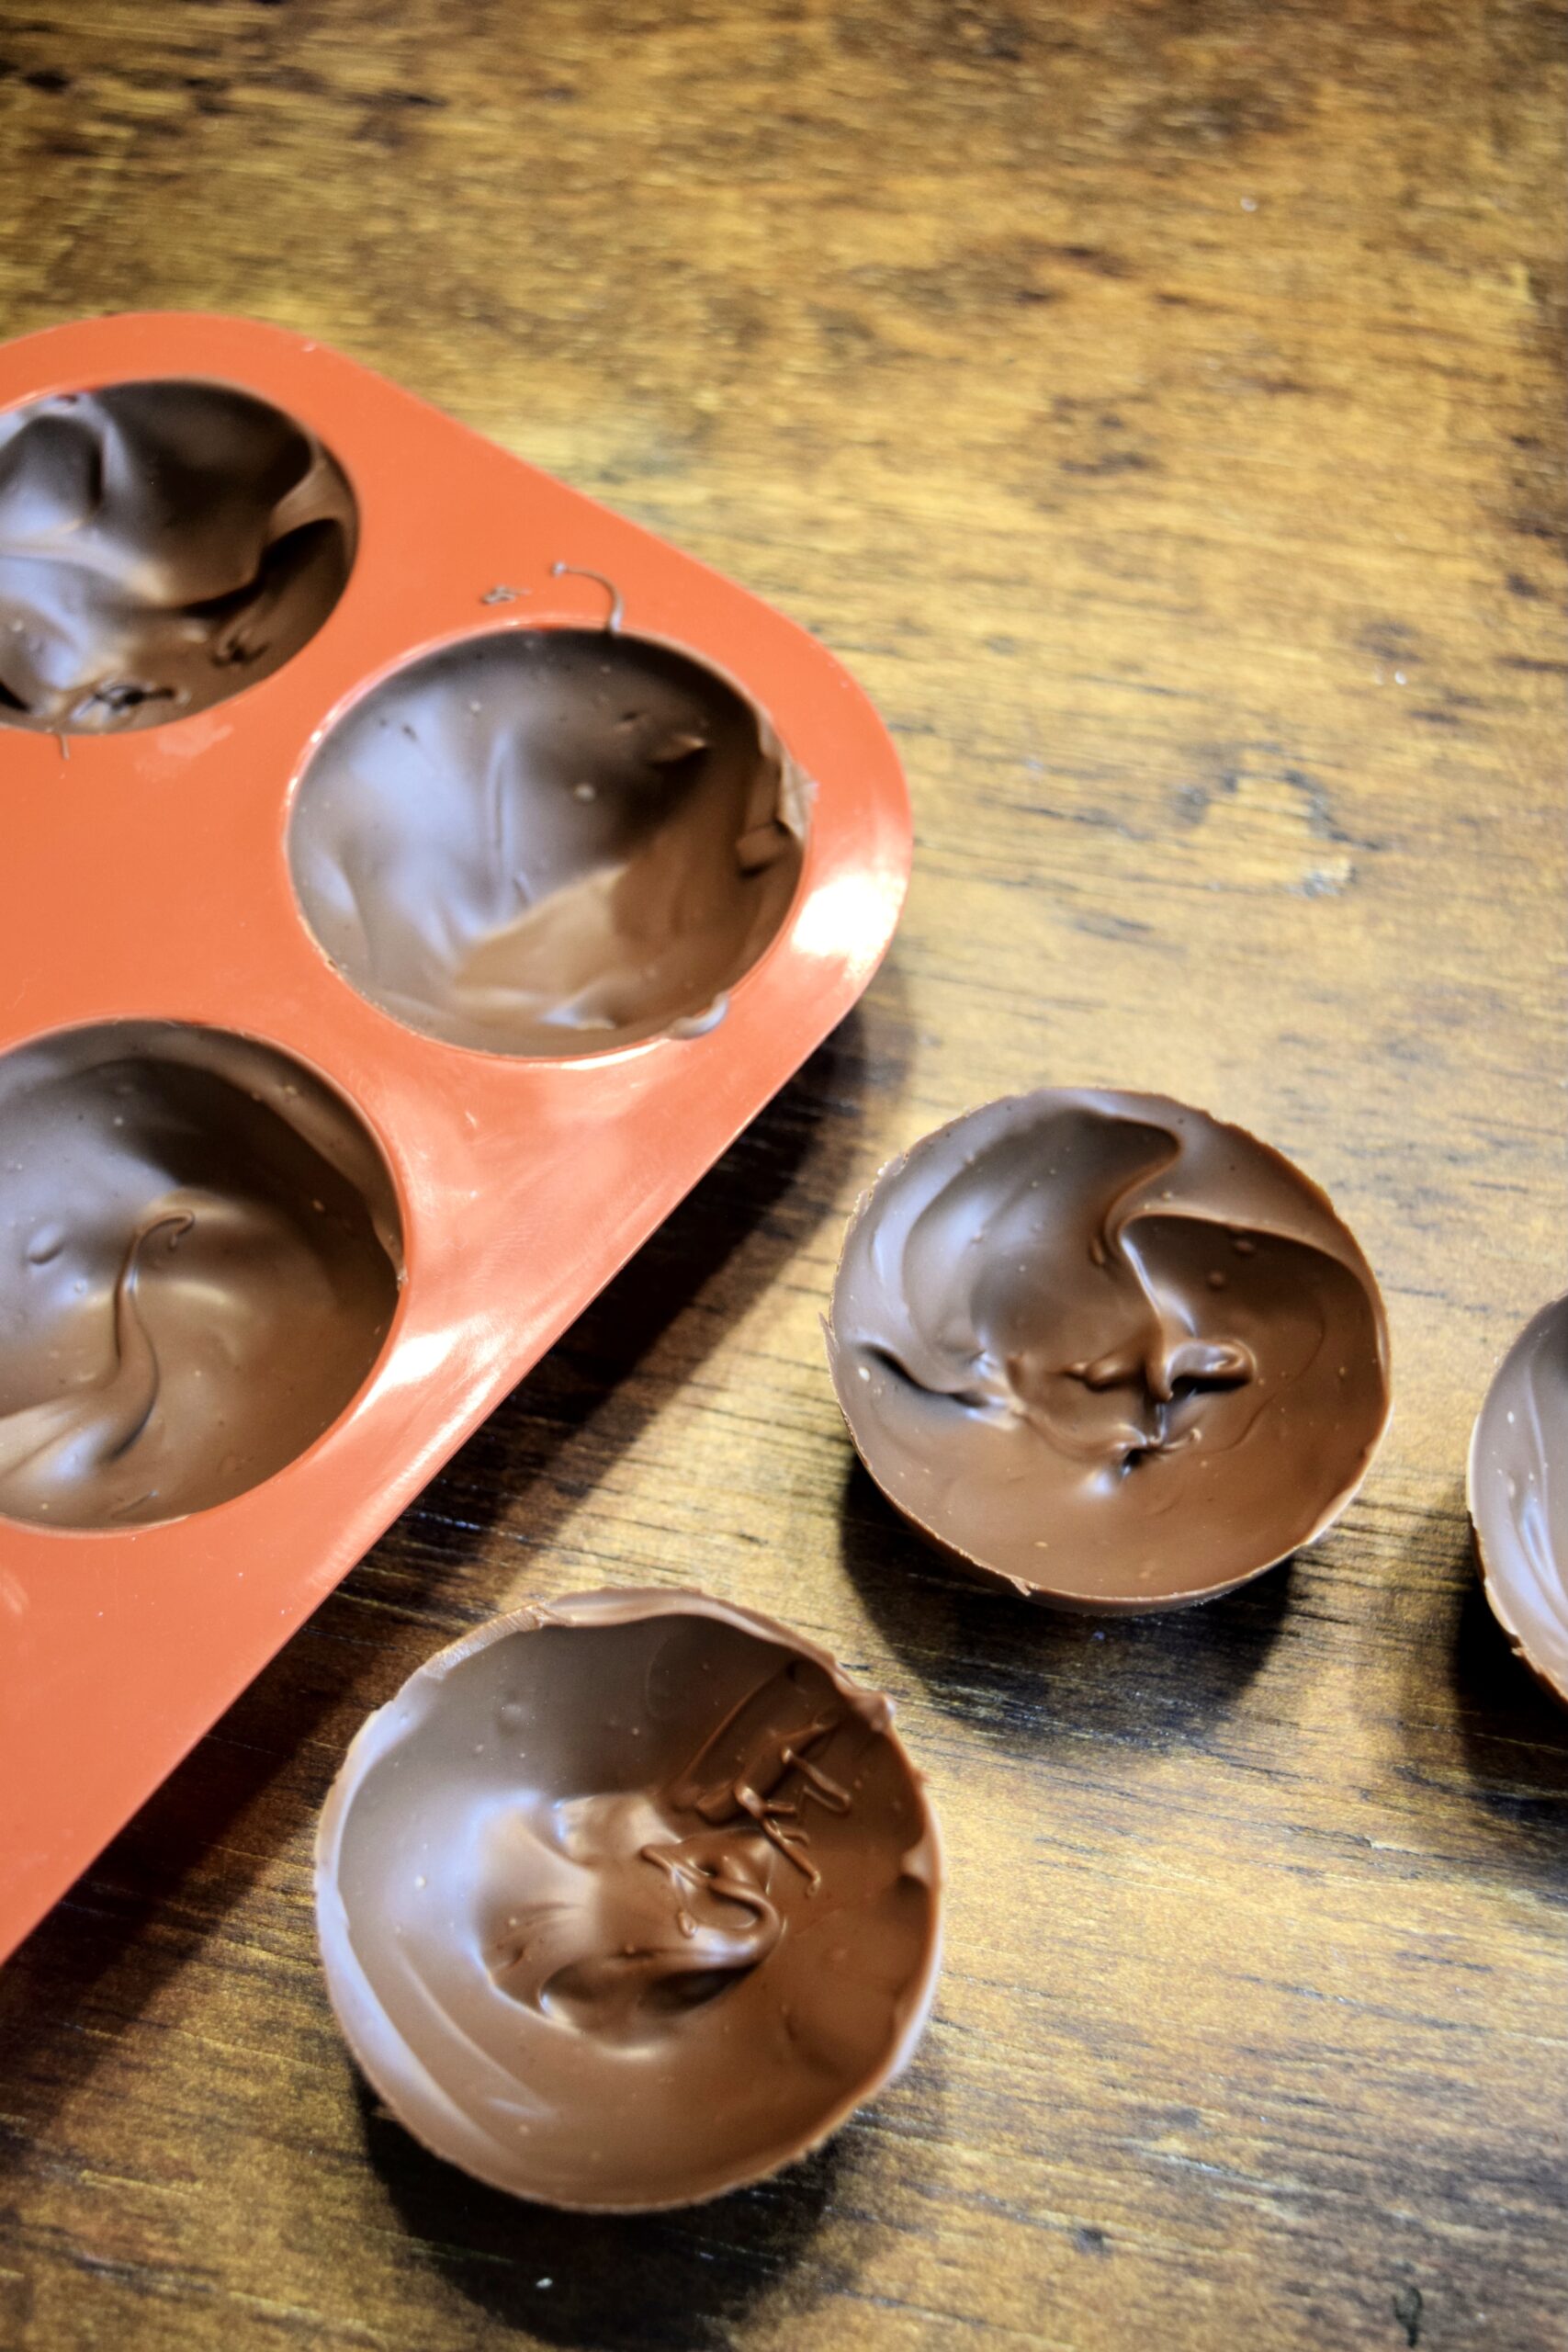 allow the chocolate coated moulds to set fully in the fridge